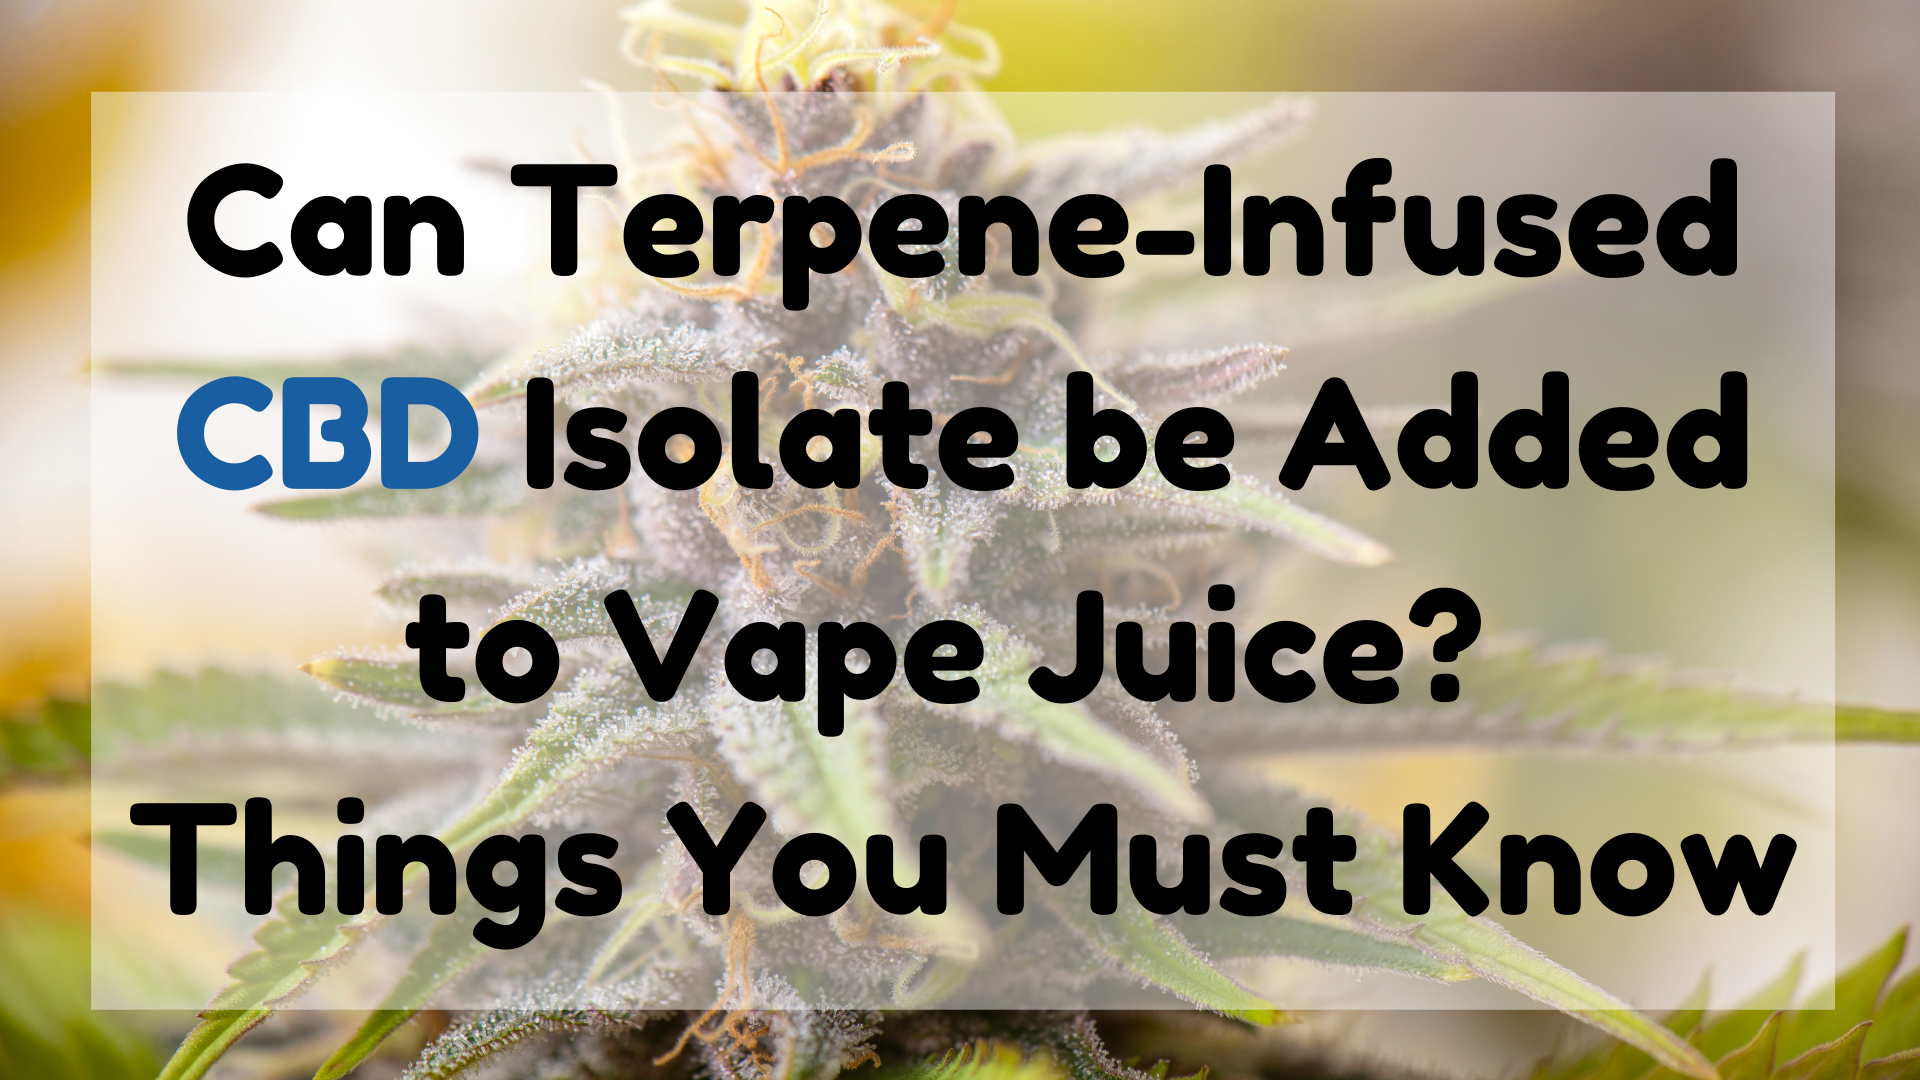 Can Terpene-Infused CBD Isolate Be Added to Vape Juice